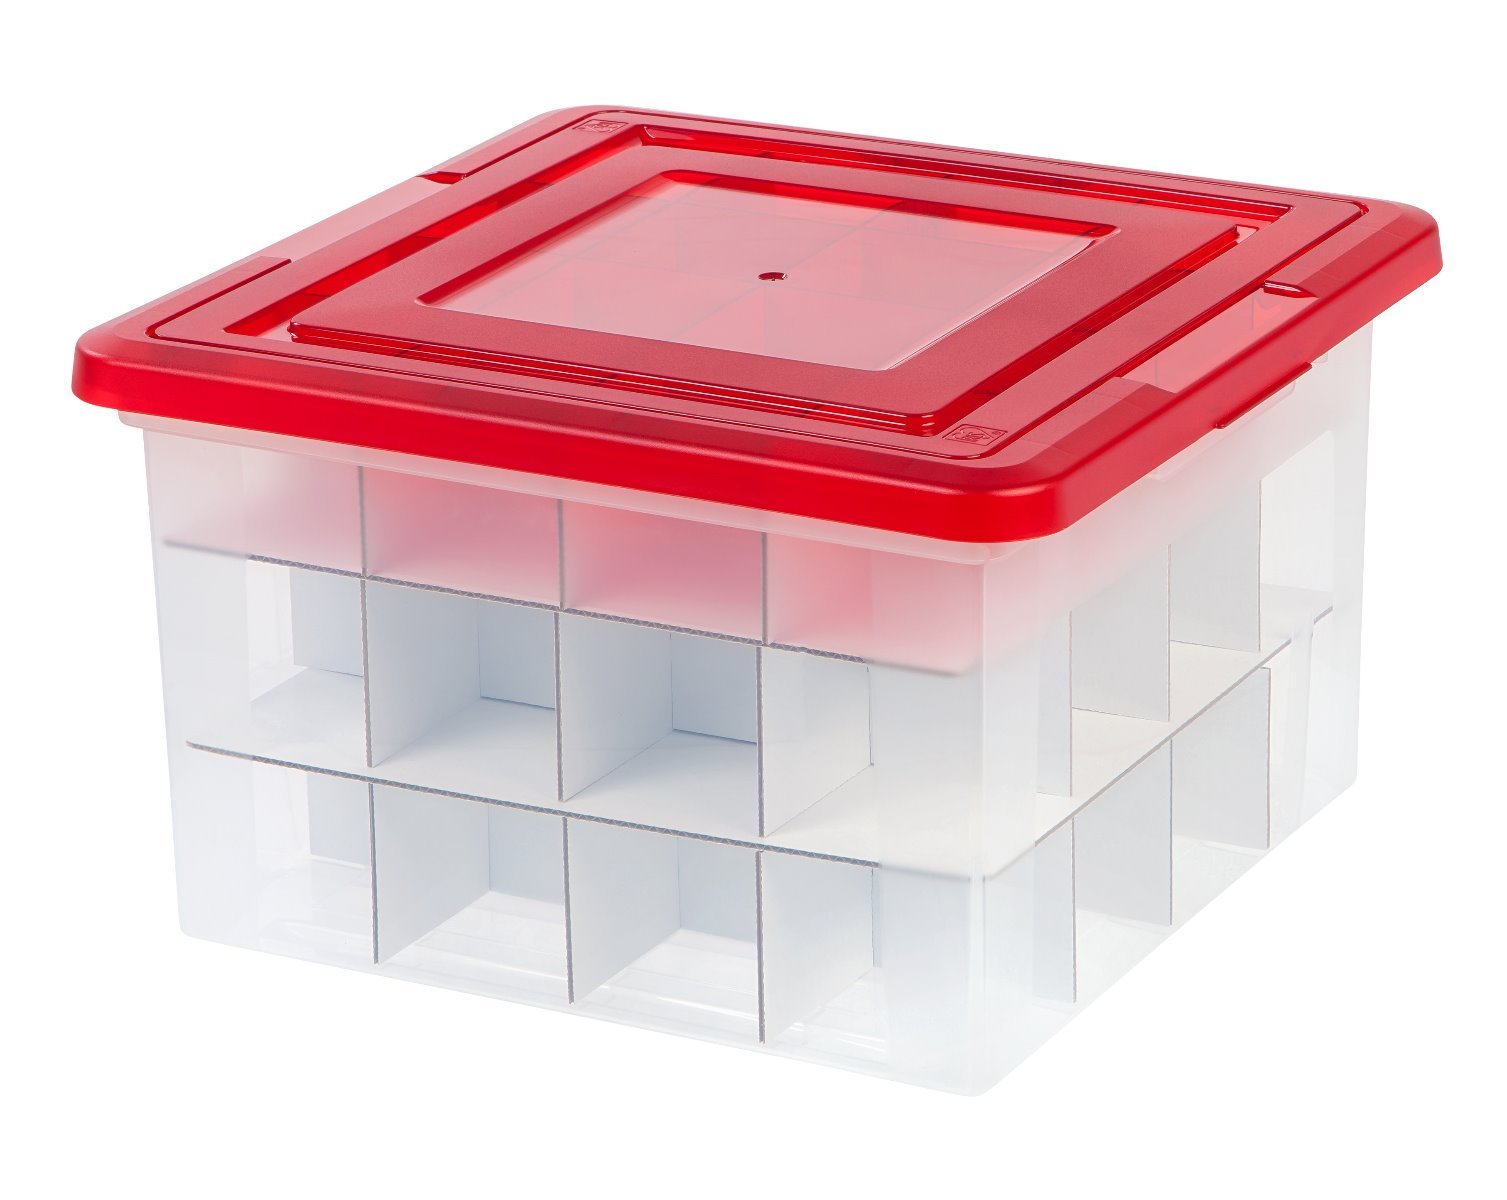 Sterilite Christmas Ornament Storage Container Holds 20 Ornaments